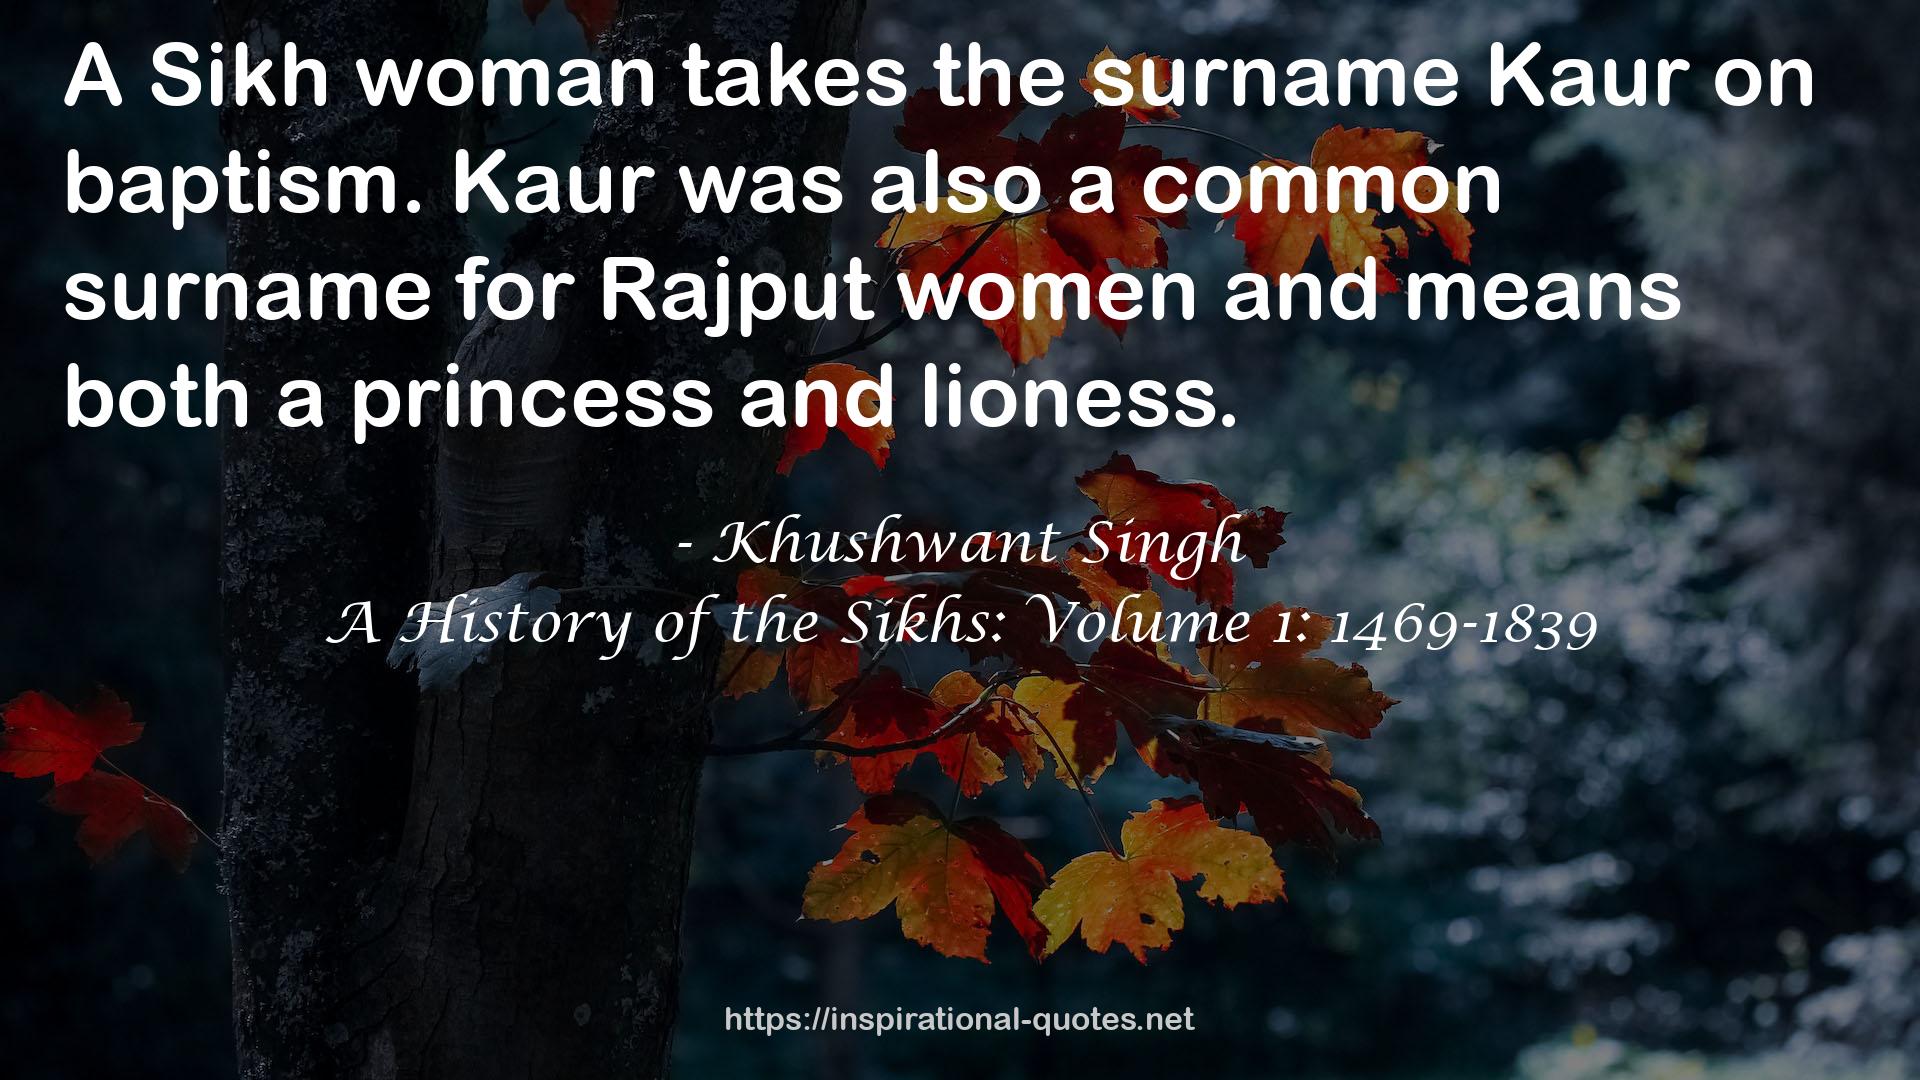 A History of the Sikhs: Volume 1: 1469-1839 QUOTES